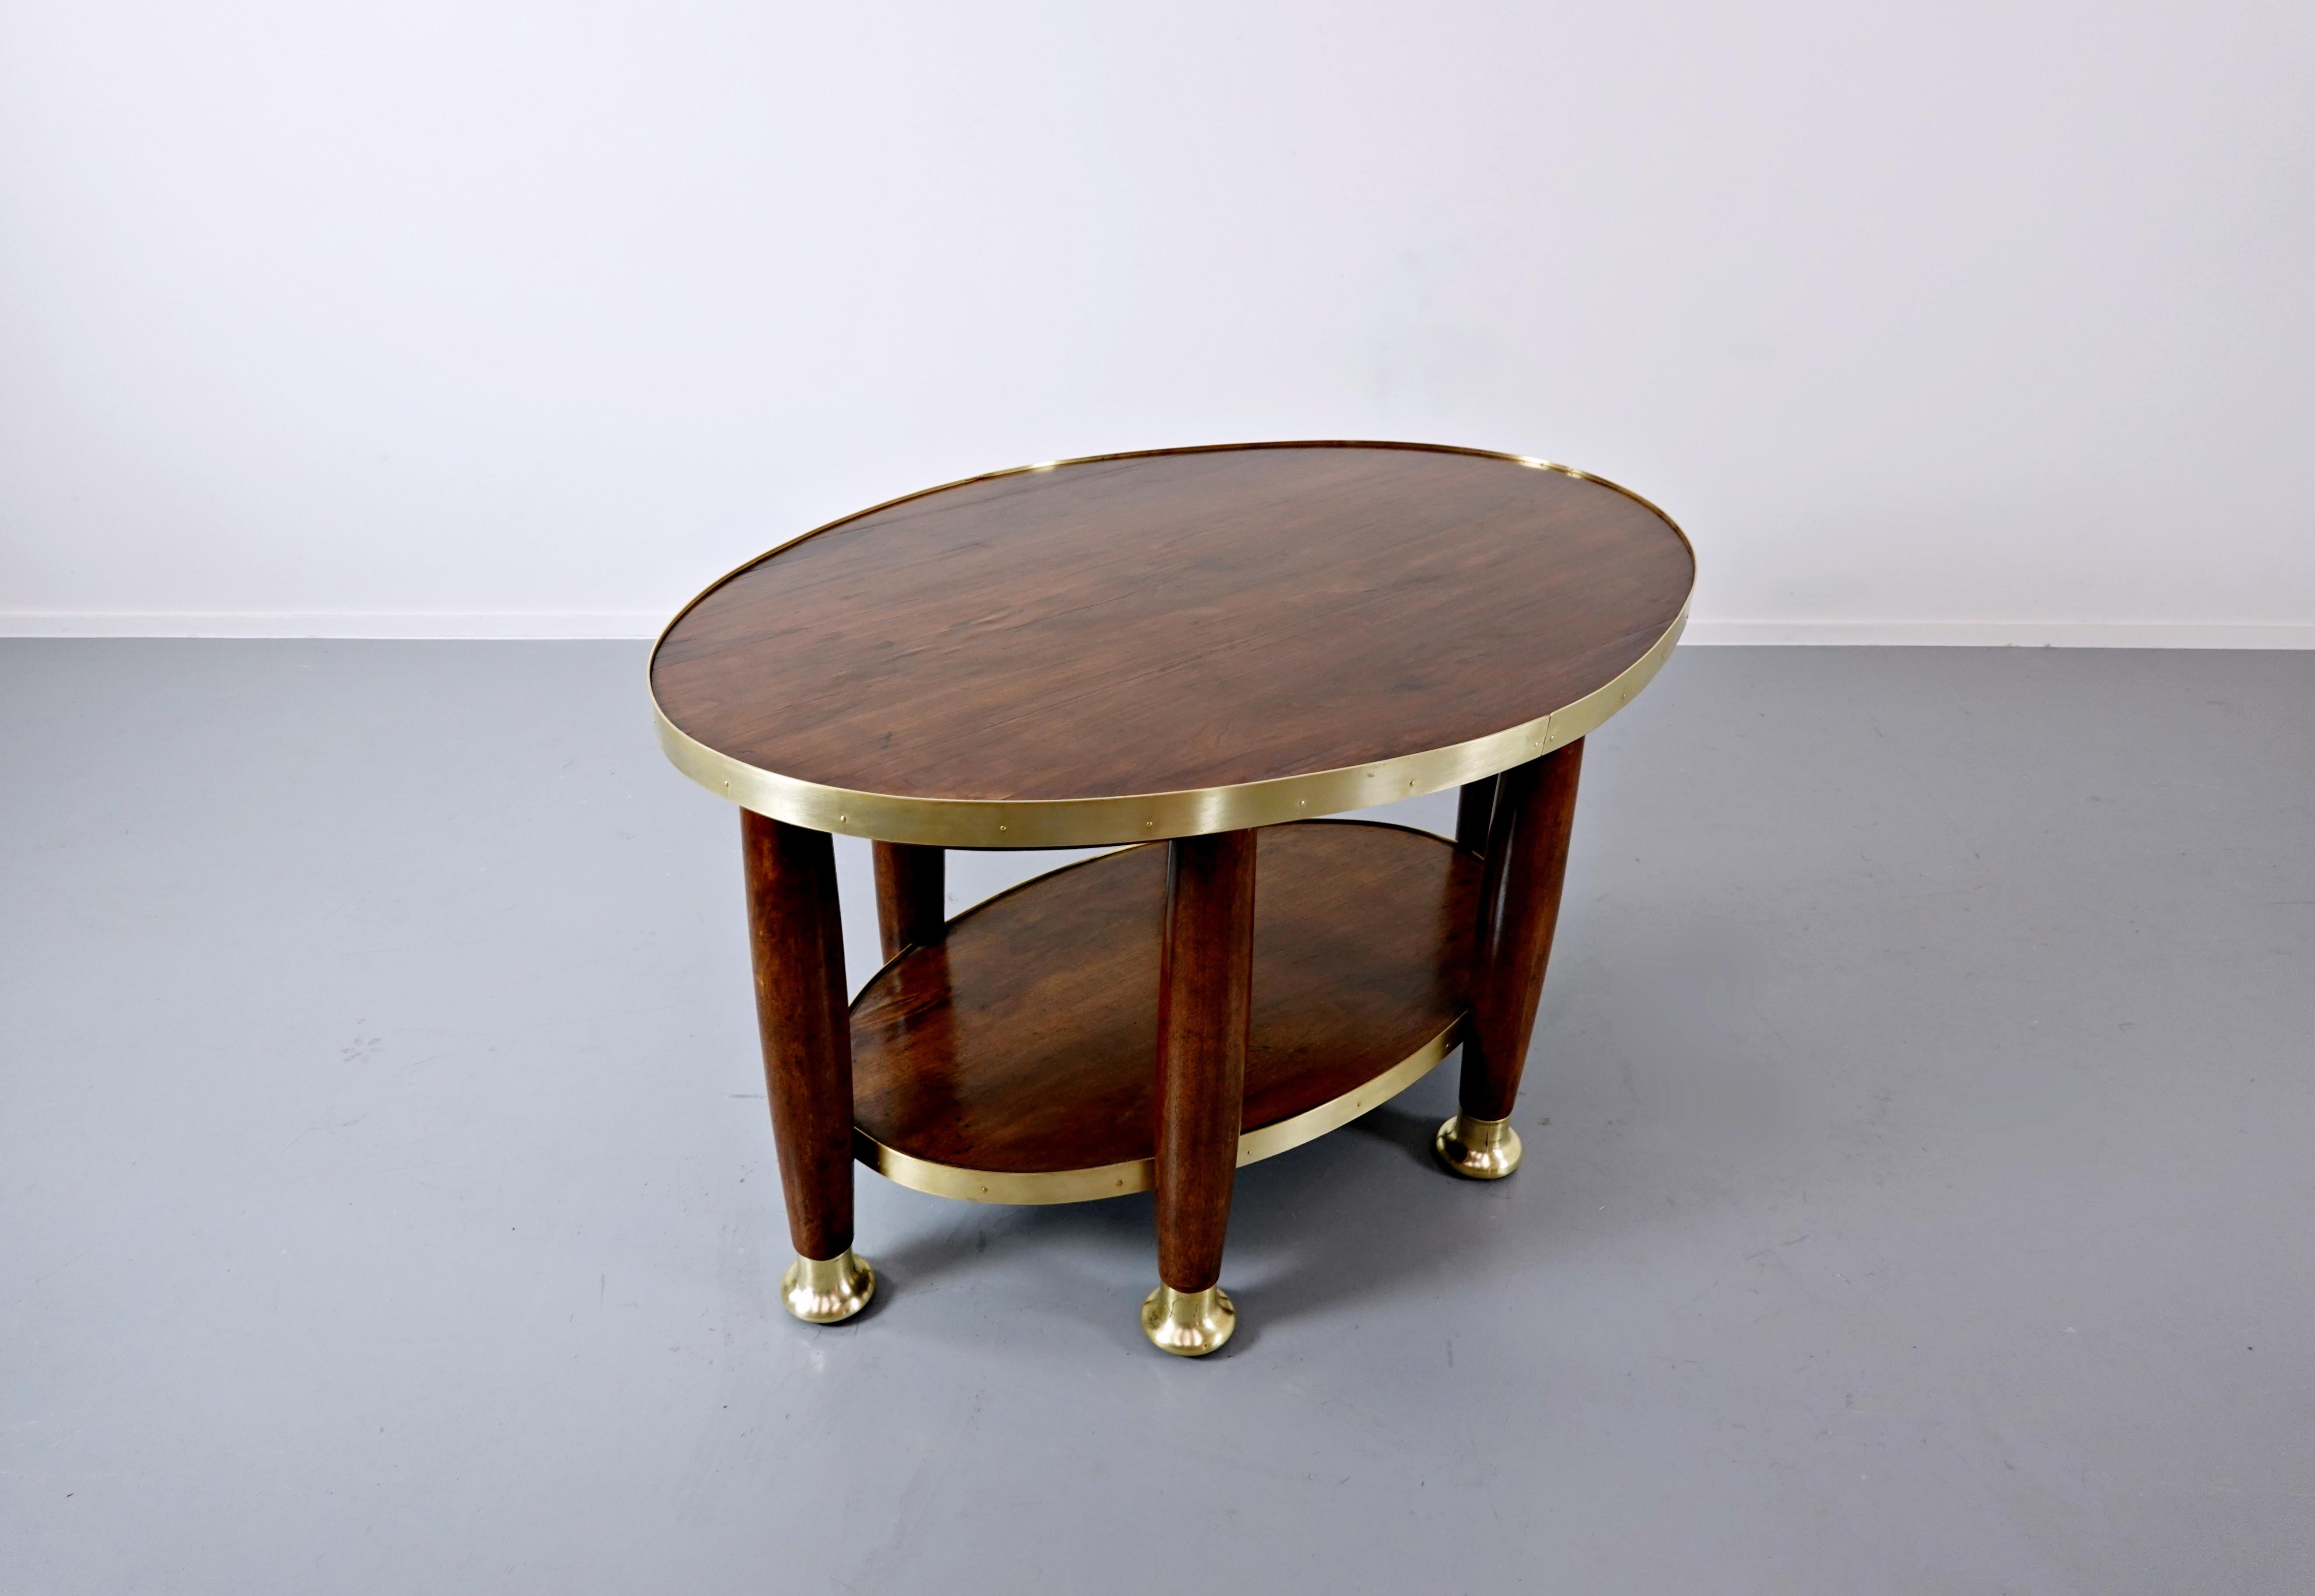 Art Nouveau Table in the Style of Adolf Loos, Wood and Brass, circa 1910 For Sale 2